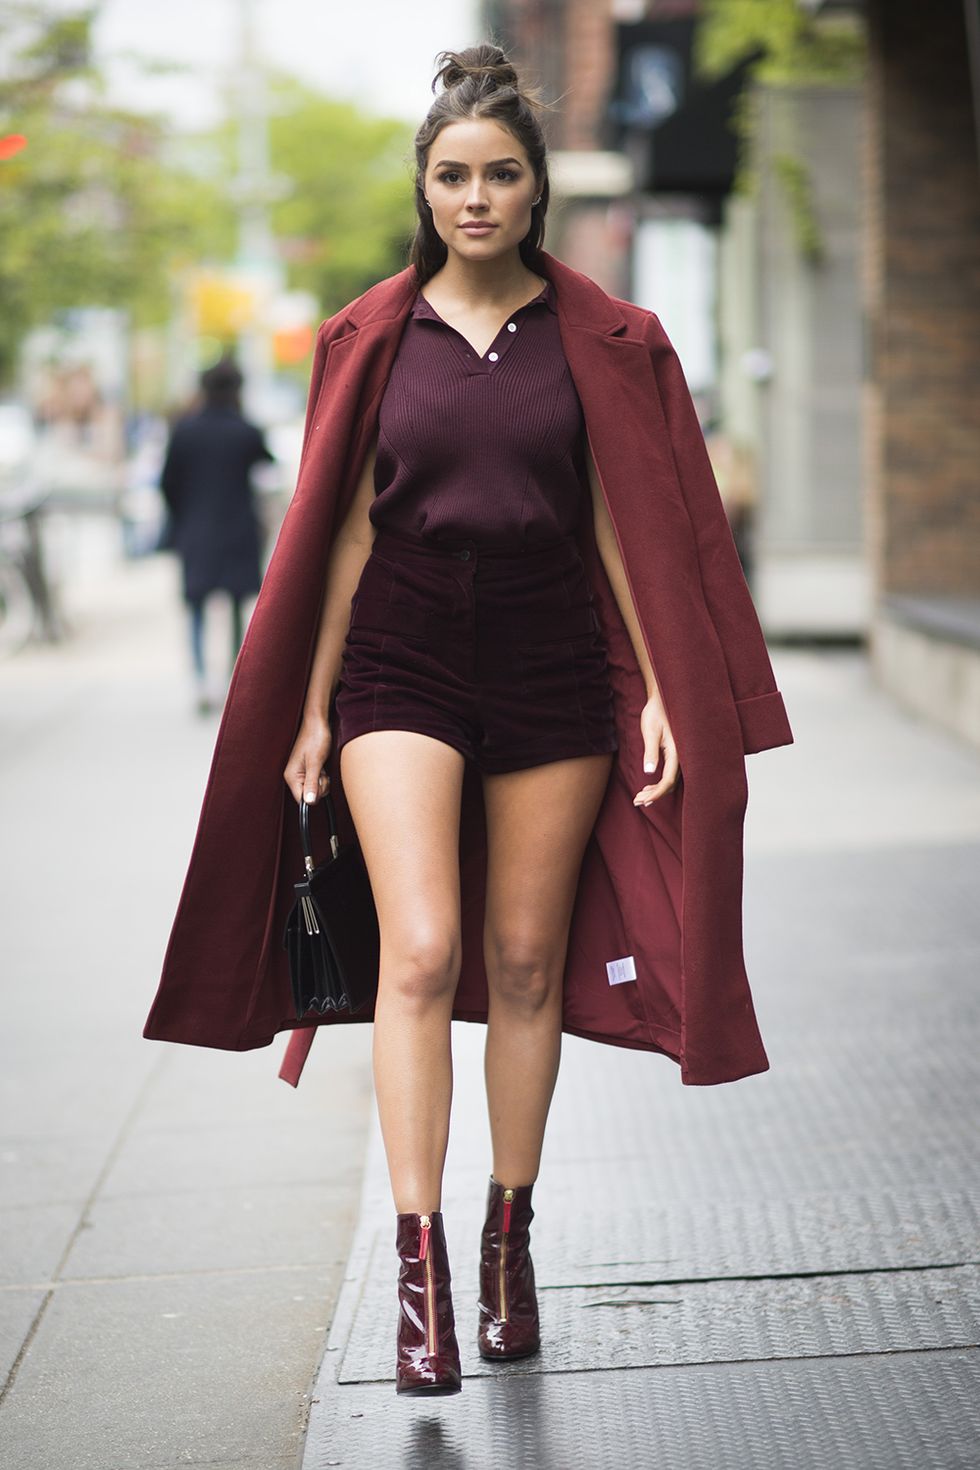 Fashion model, Clothing, Street fashion, Fashion, Red, Brown, Beauty, Maroon, Outerwear, Shoulder, 